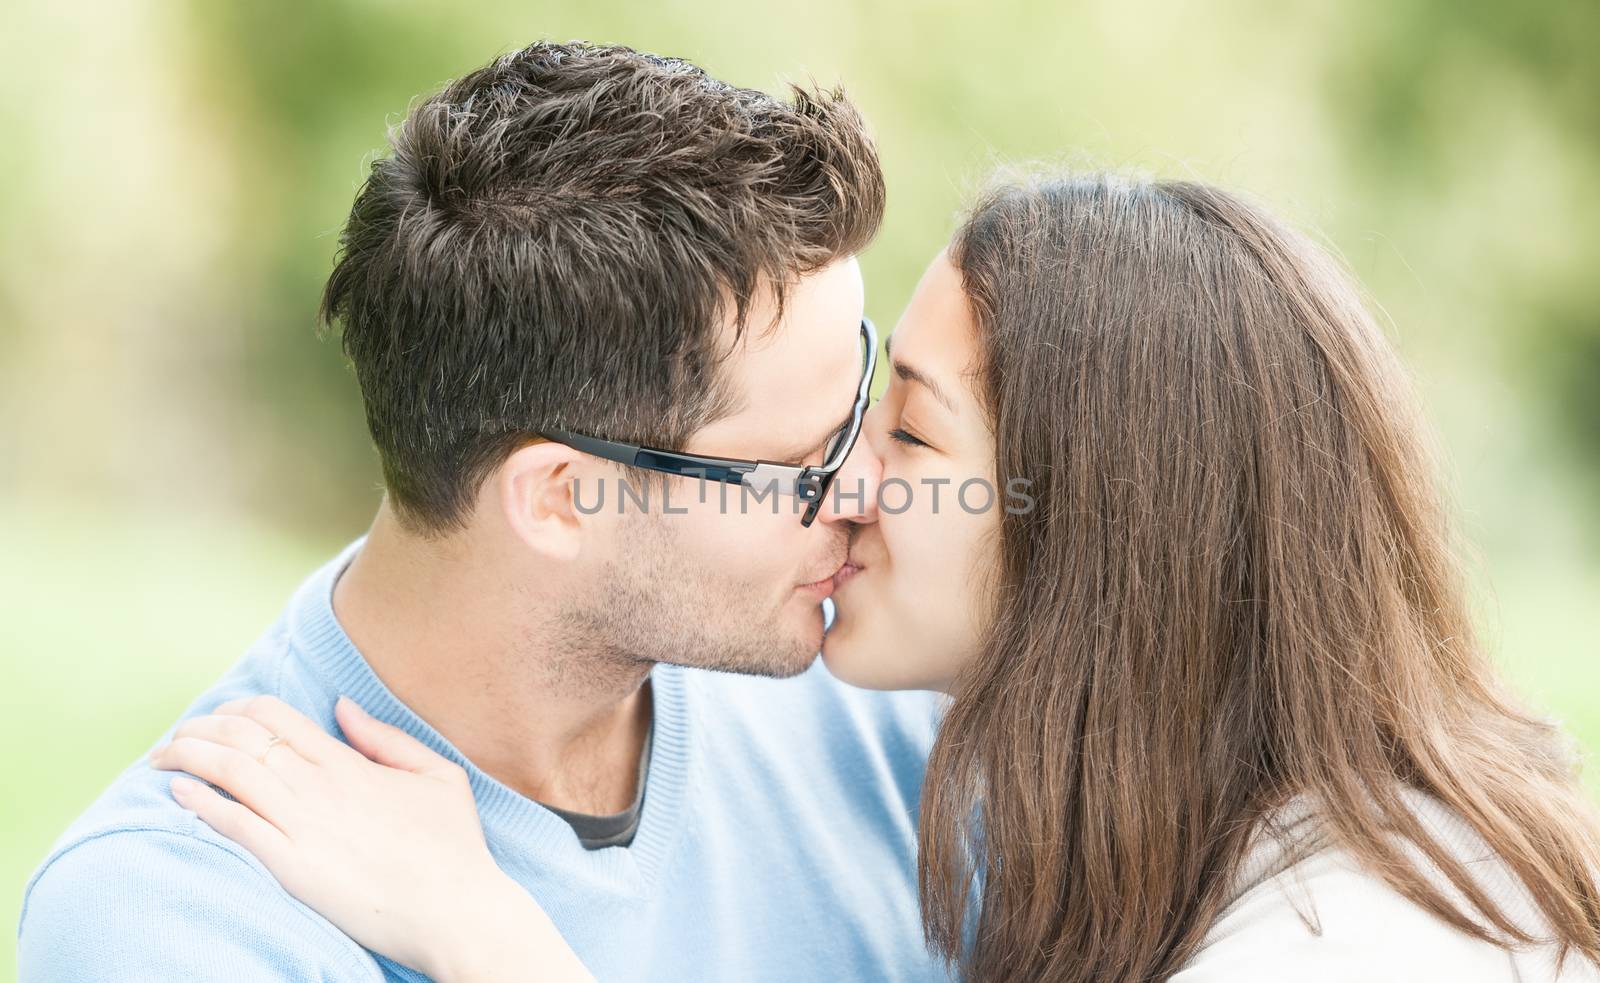 Handsome man in glasses and pretty woman kissing outdoors. Husband and wife giving kiss to each other in park. Happy family expressing feelings. Portrait of beautiful romantic couple in love.